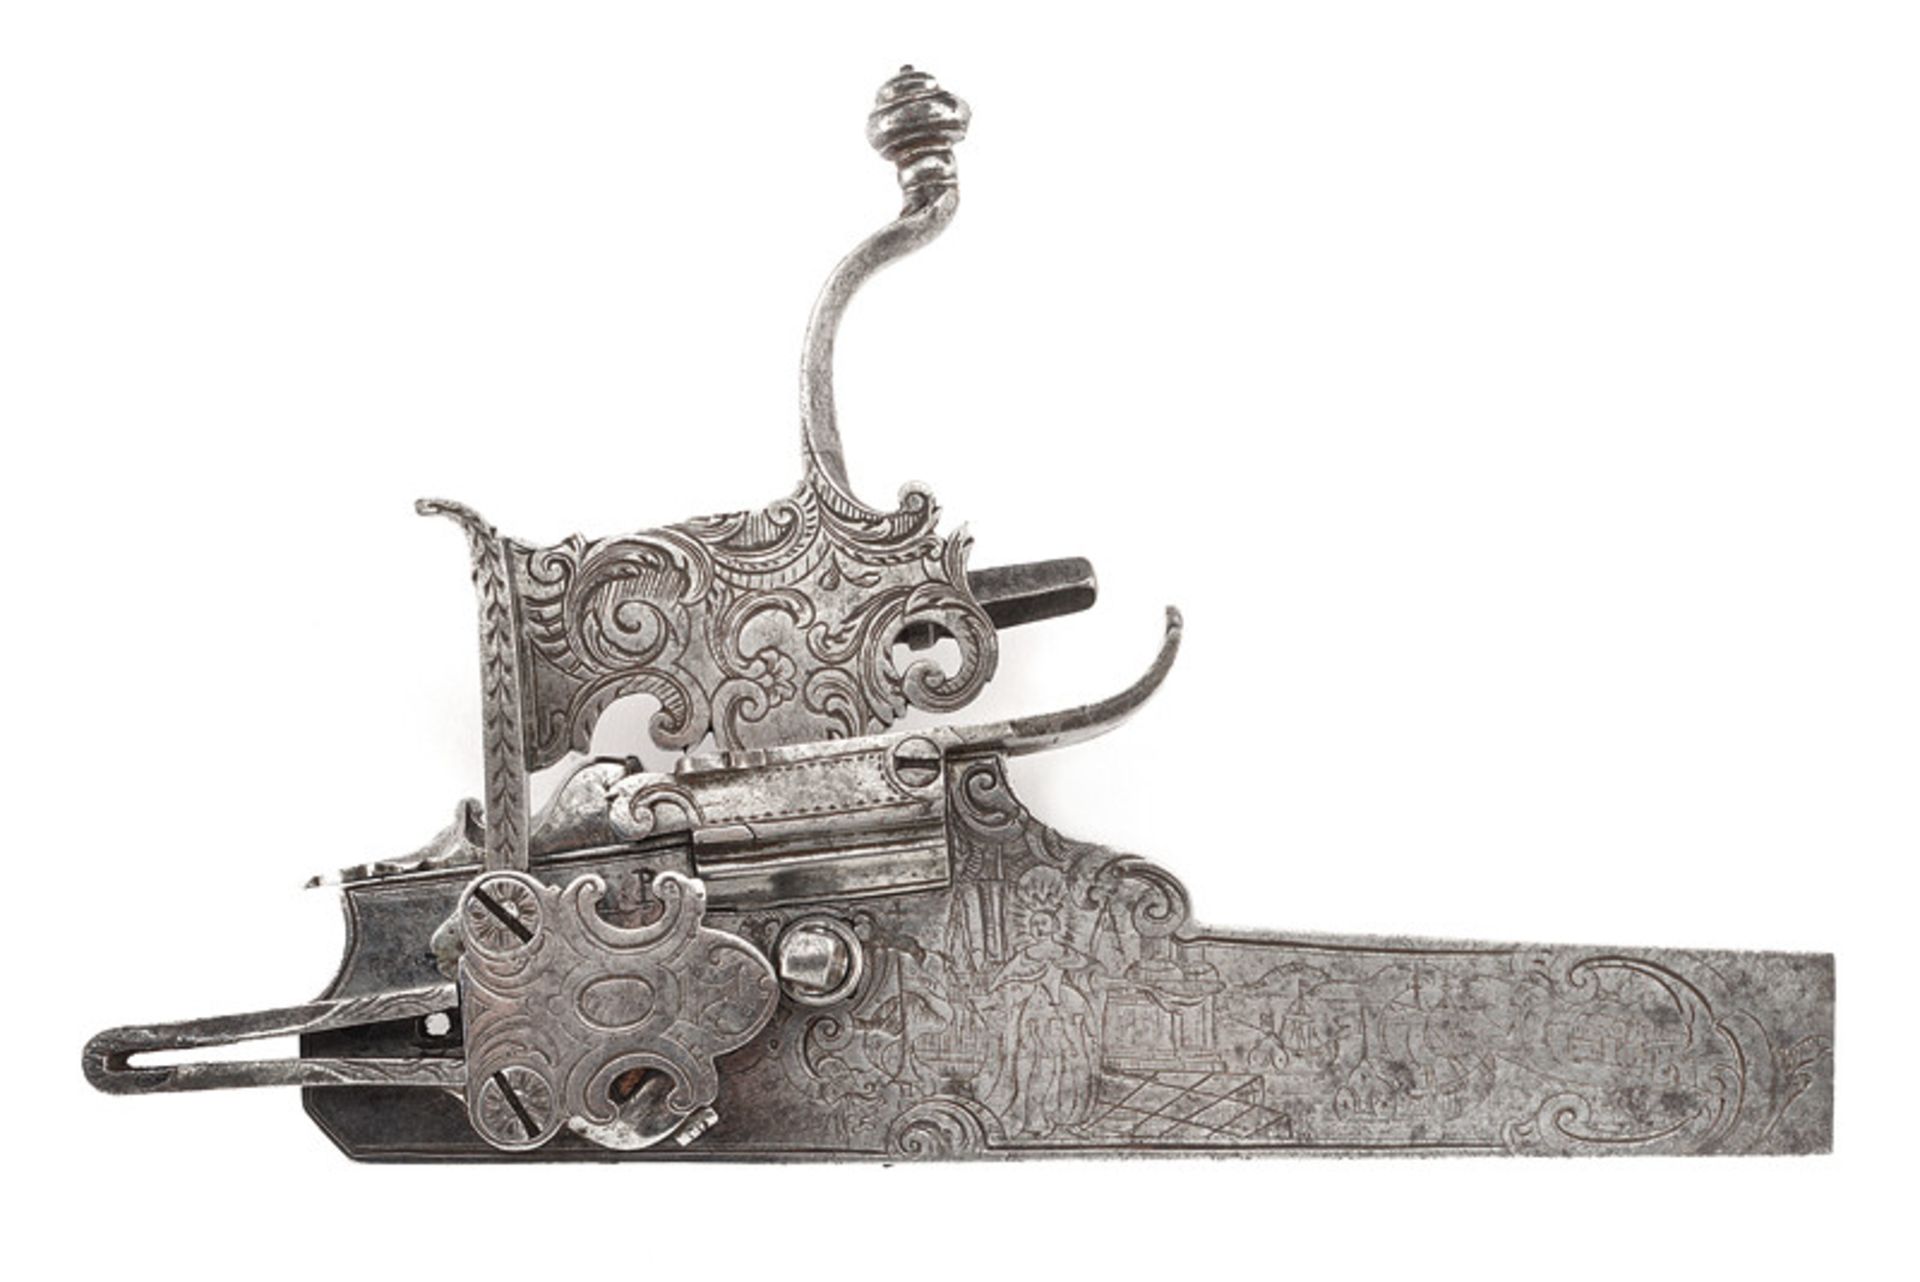 A rare left side wheel lock for a rifle dating: mid-12th Century provenance: Germany Big, lock